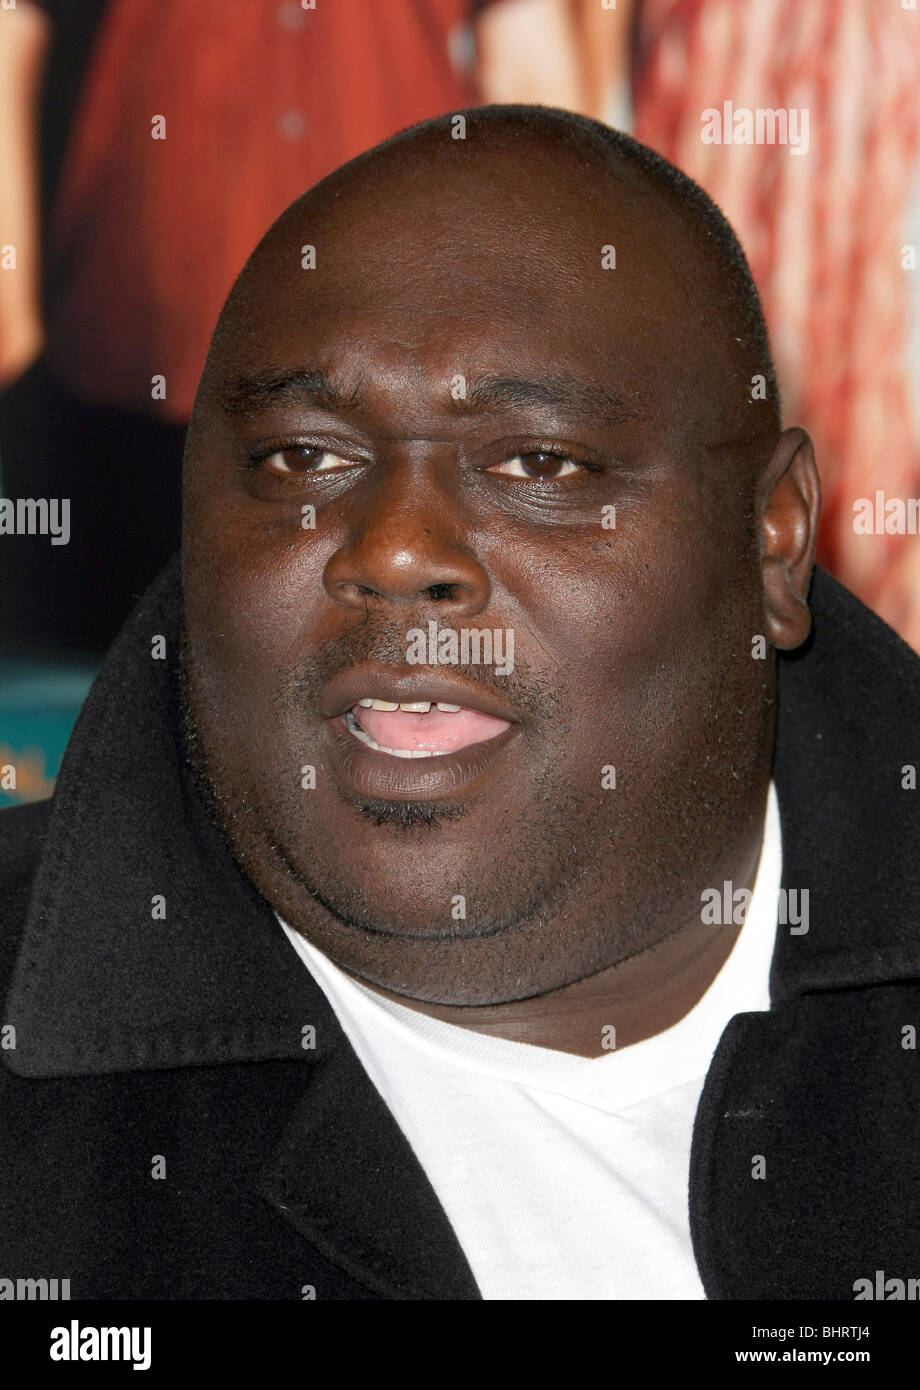 Actor Faizon Love files lawsuit after being omitted from Couples